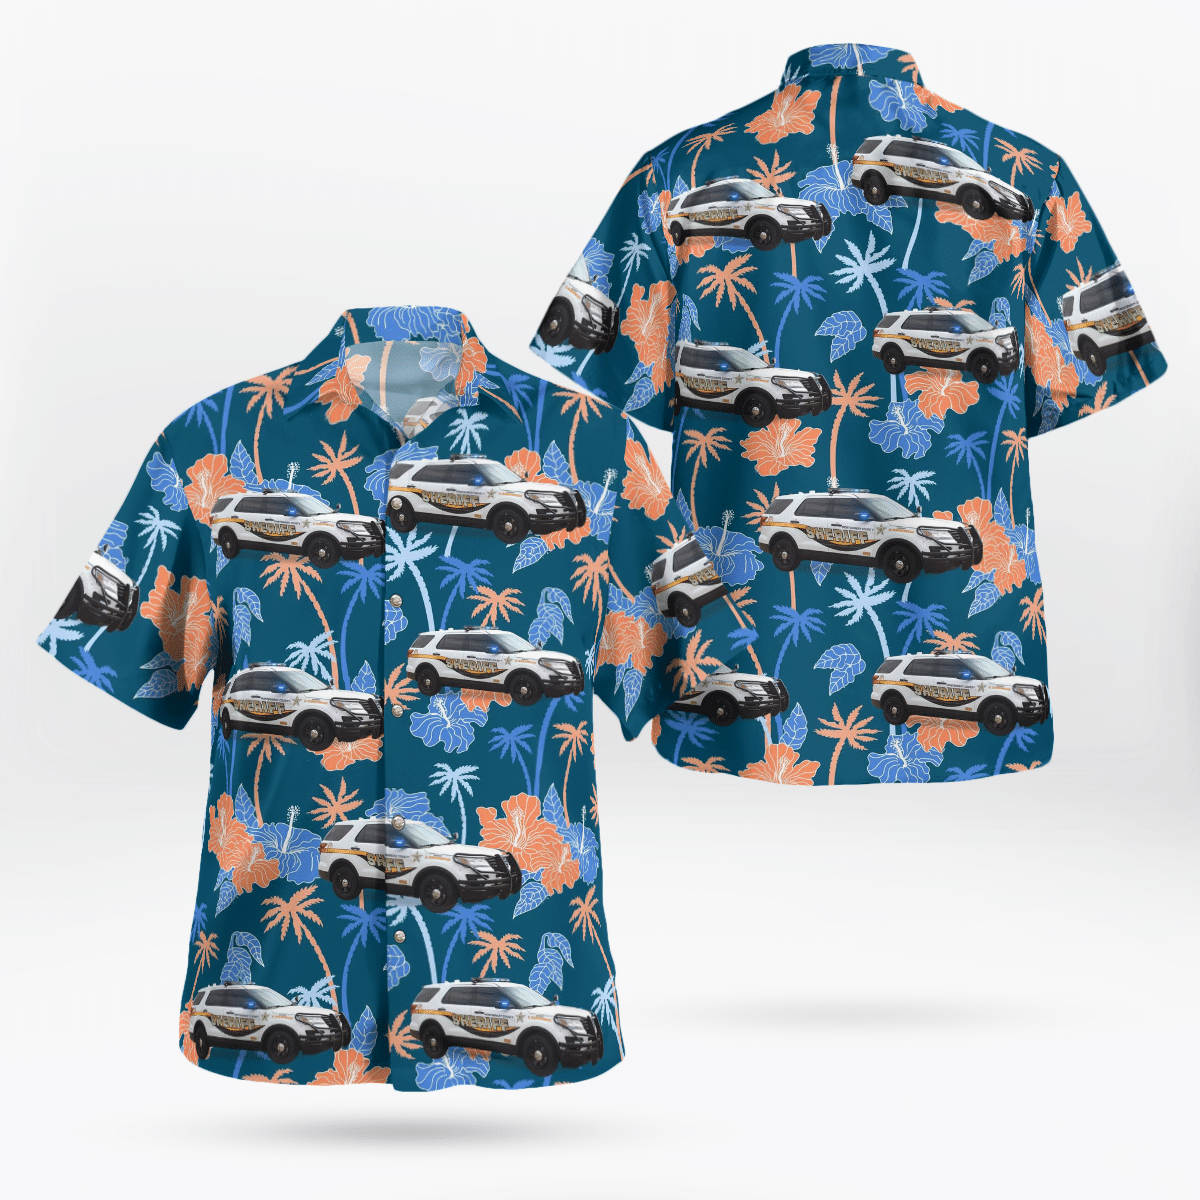 Shop now to find the perfect Hawaii Shirt for your hobby 97